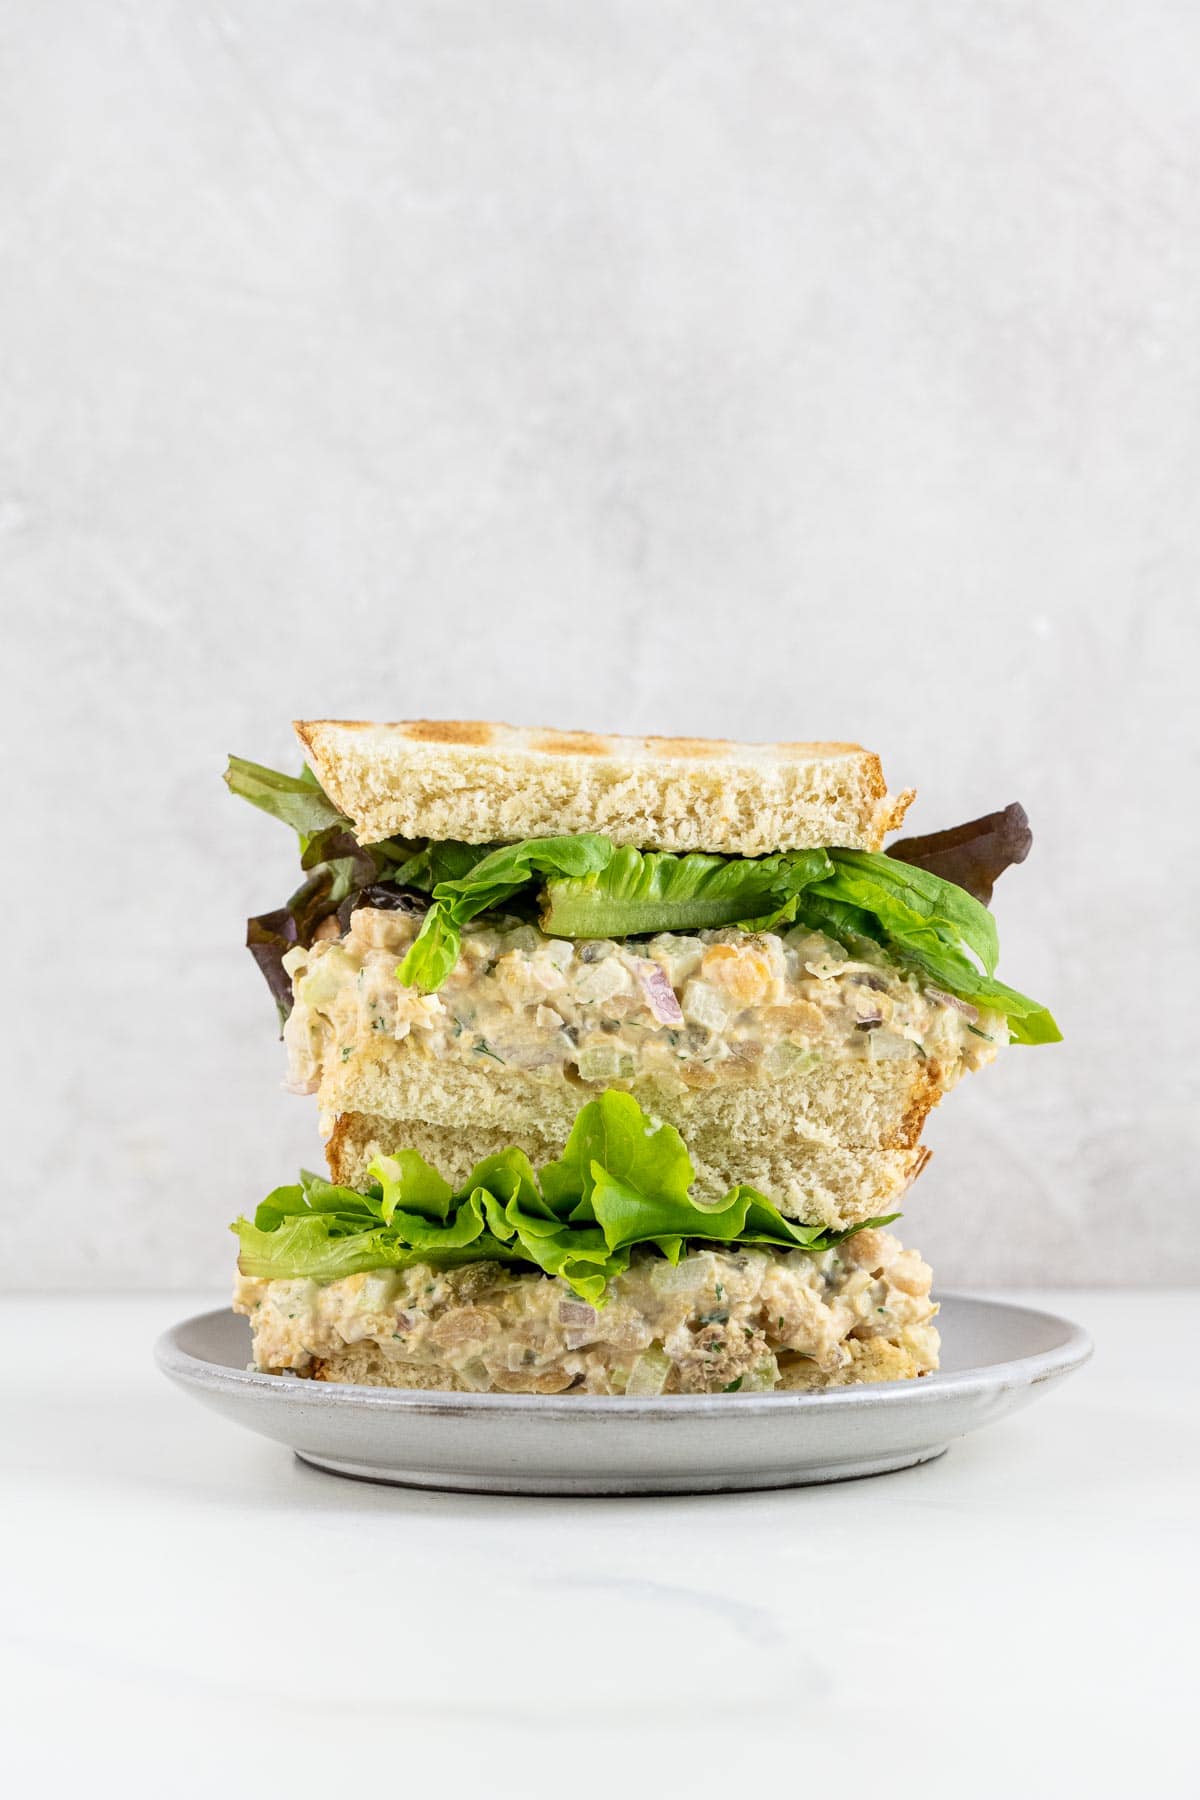 a chickpea tuna salad sandwich on toasted white bread with mixed greens